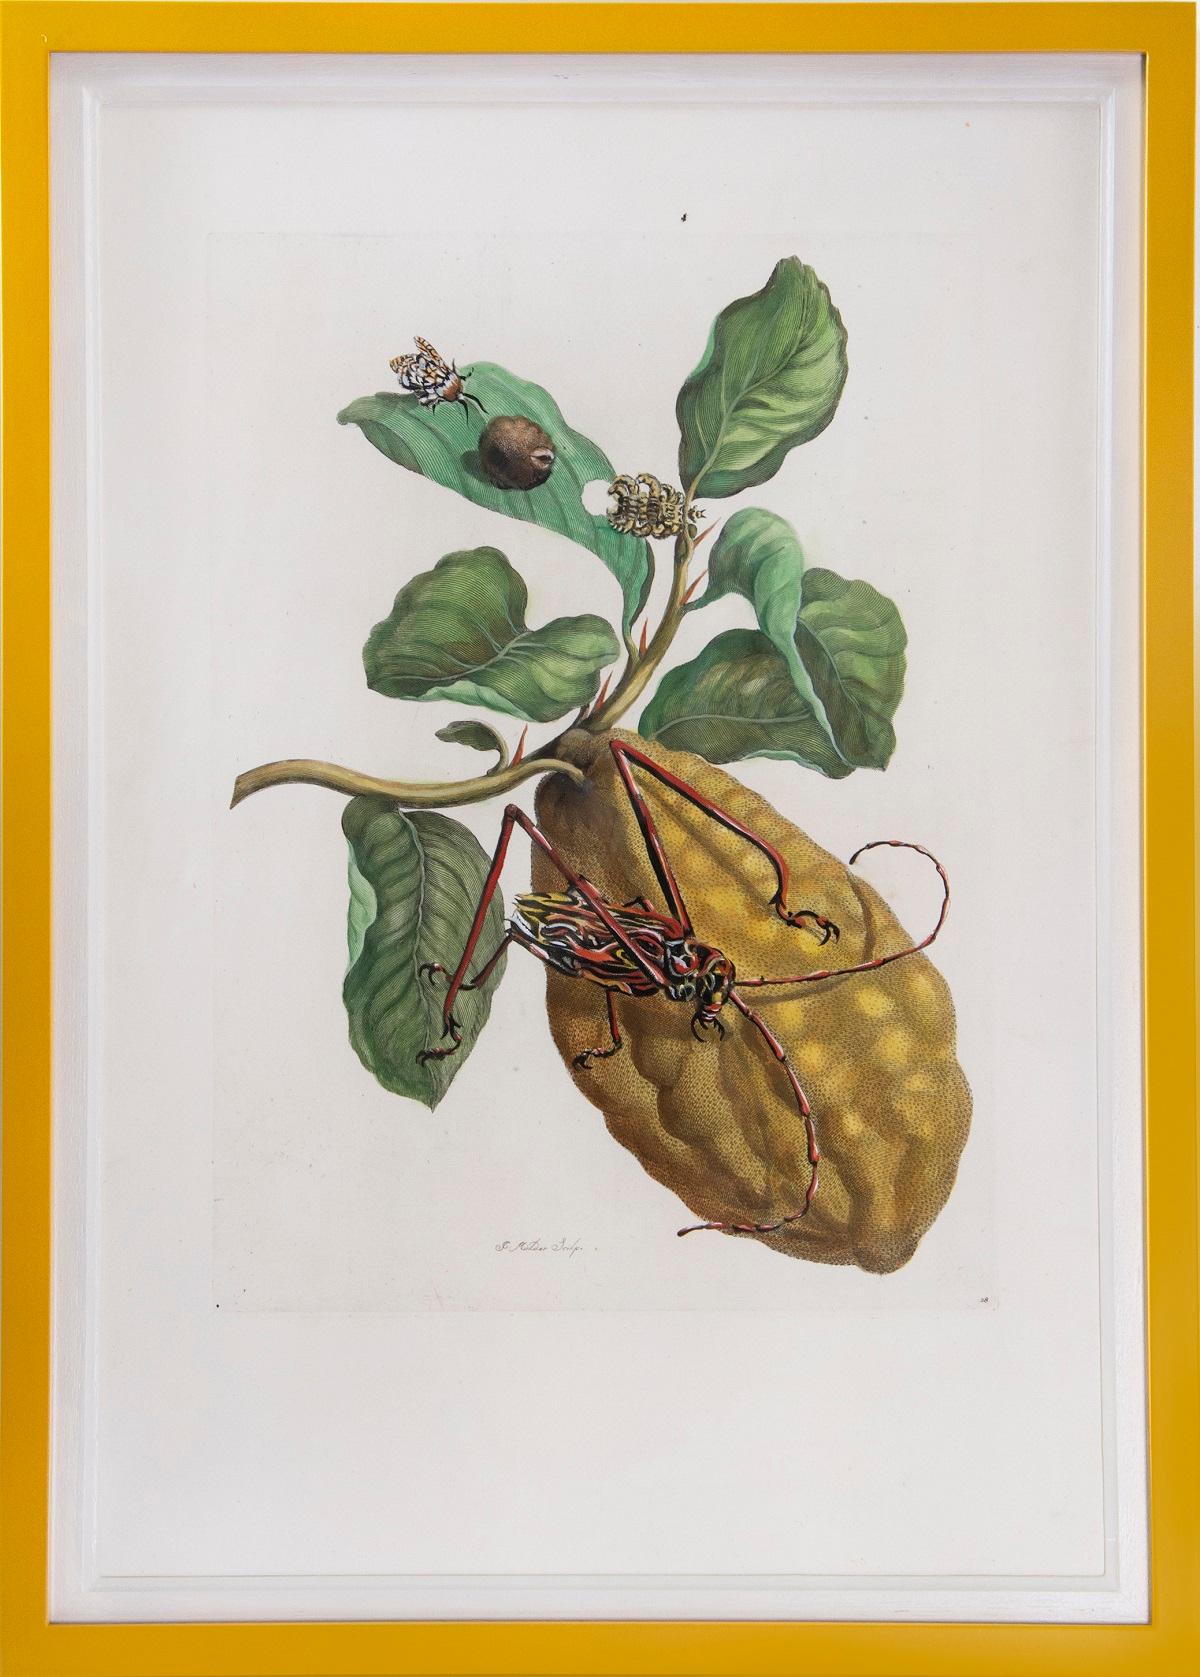 Merian - A Group of Six Flowers, Insects and Fruits.   - Naturalistic Print by Maria Sybilla Merian